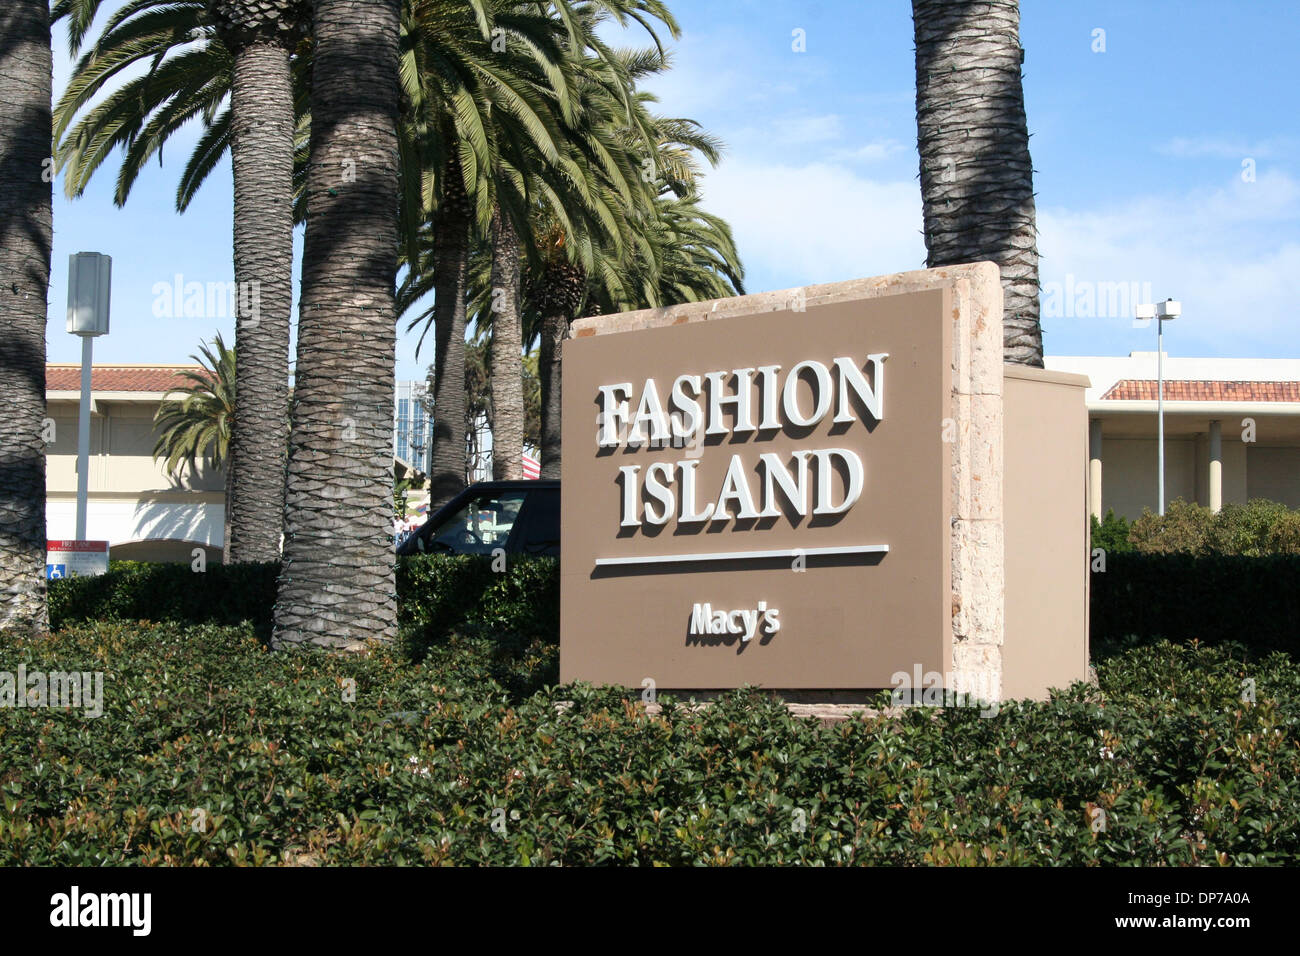 Fashion Island - Shopping, Dining and Entertainment